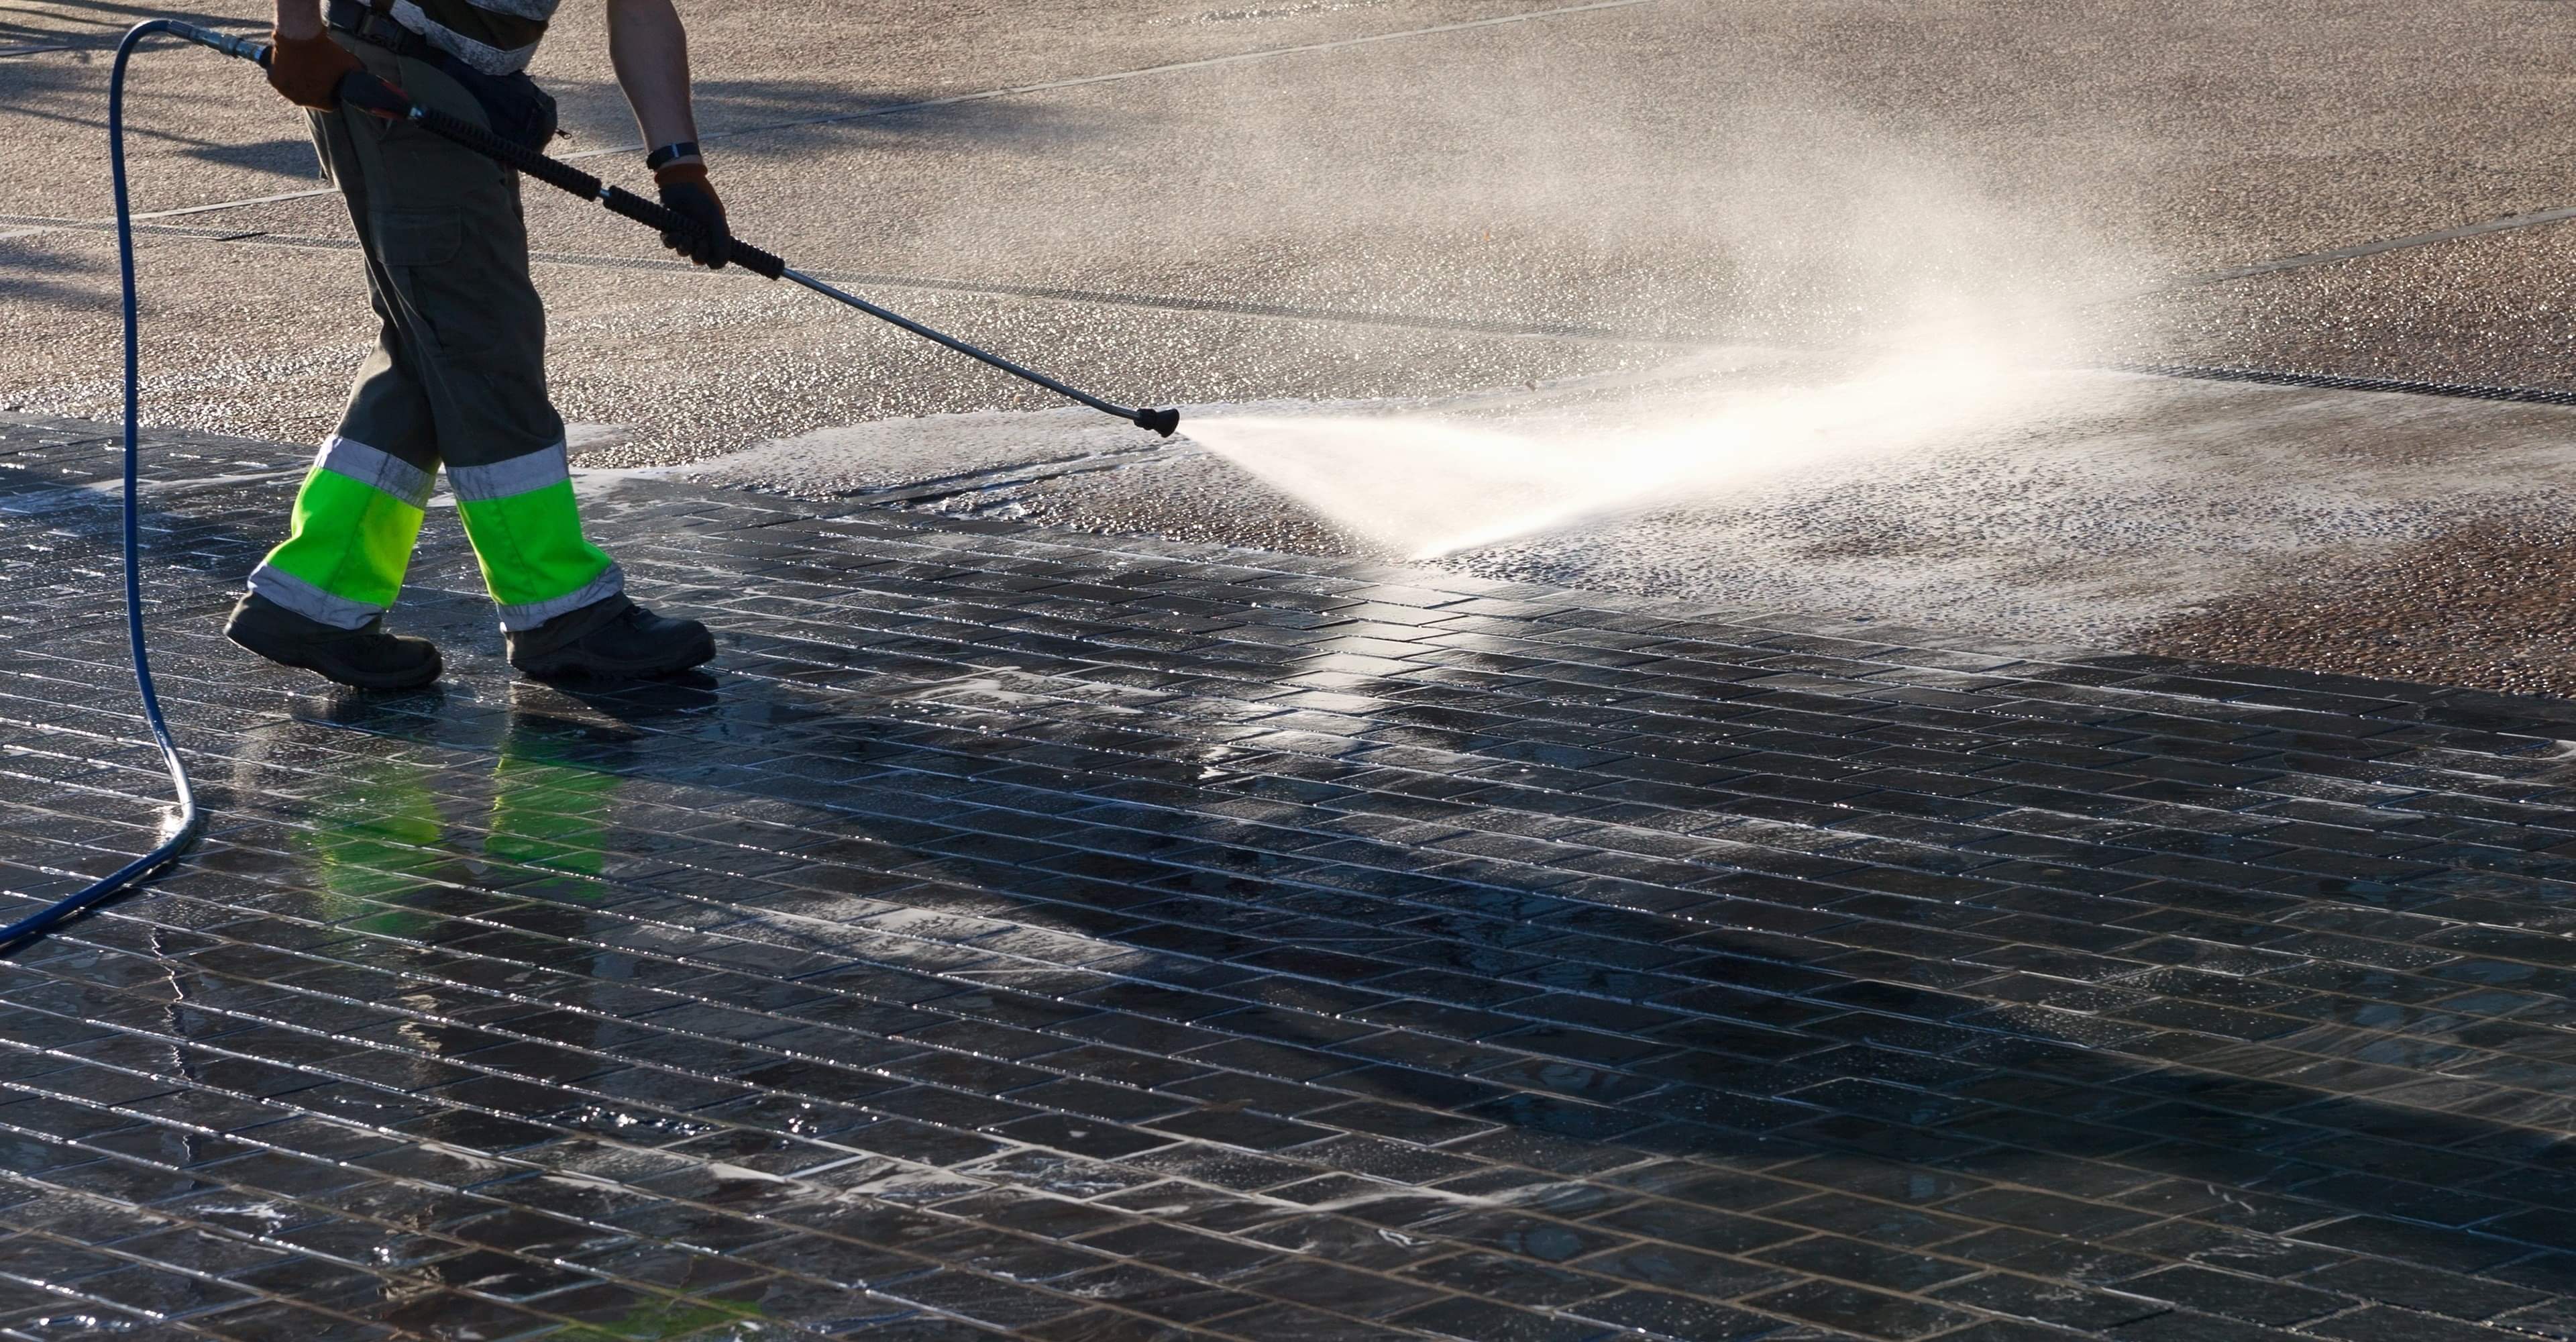 Pressure Washing Services in Cleveland TX